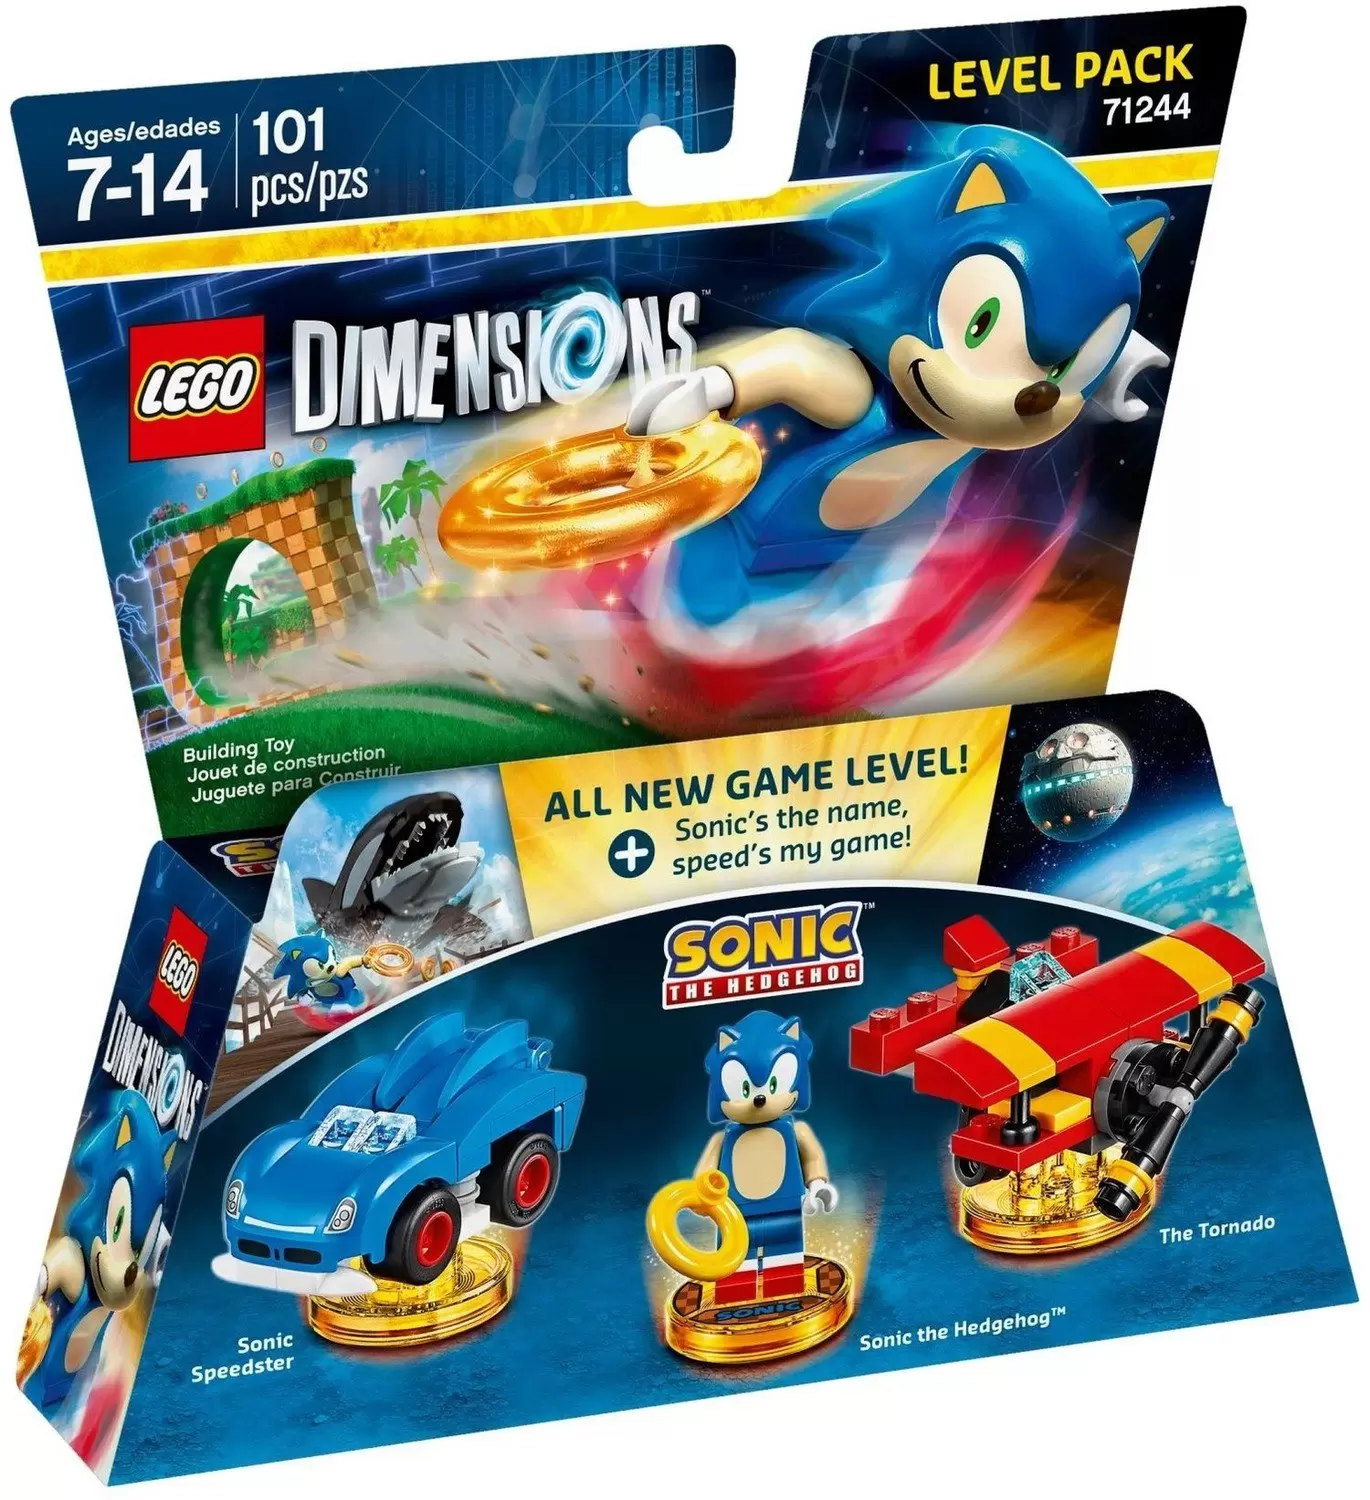 LEGO Dimensions - Sonic the Hedgehog Level Pack